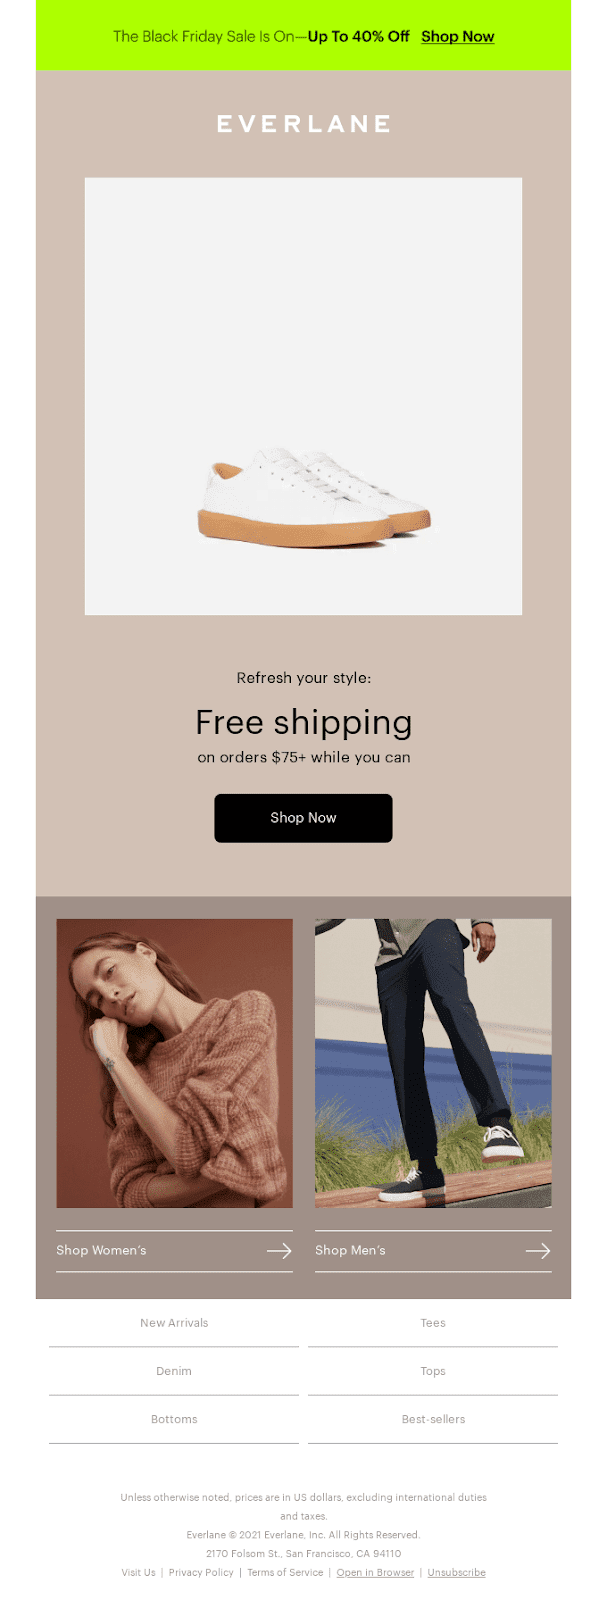 Our Top Five Best-Sellers from Everlane - Desktop Email View